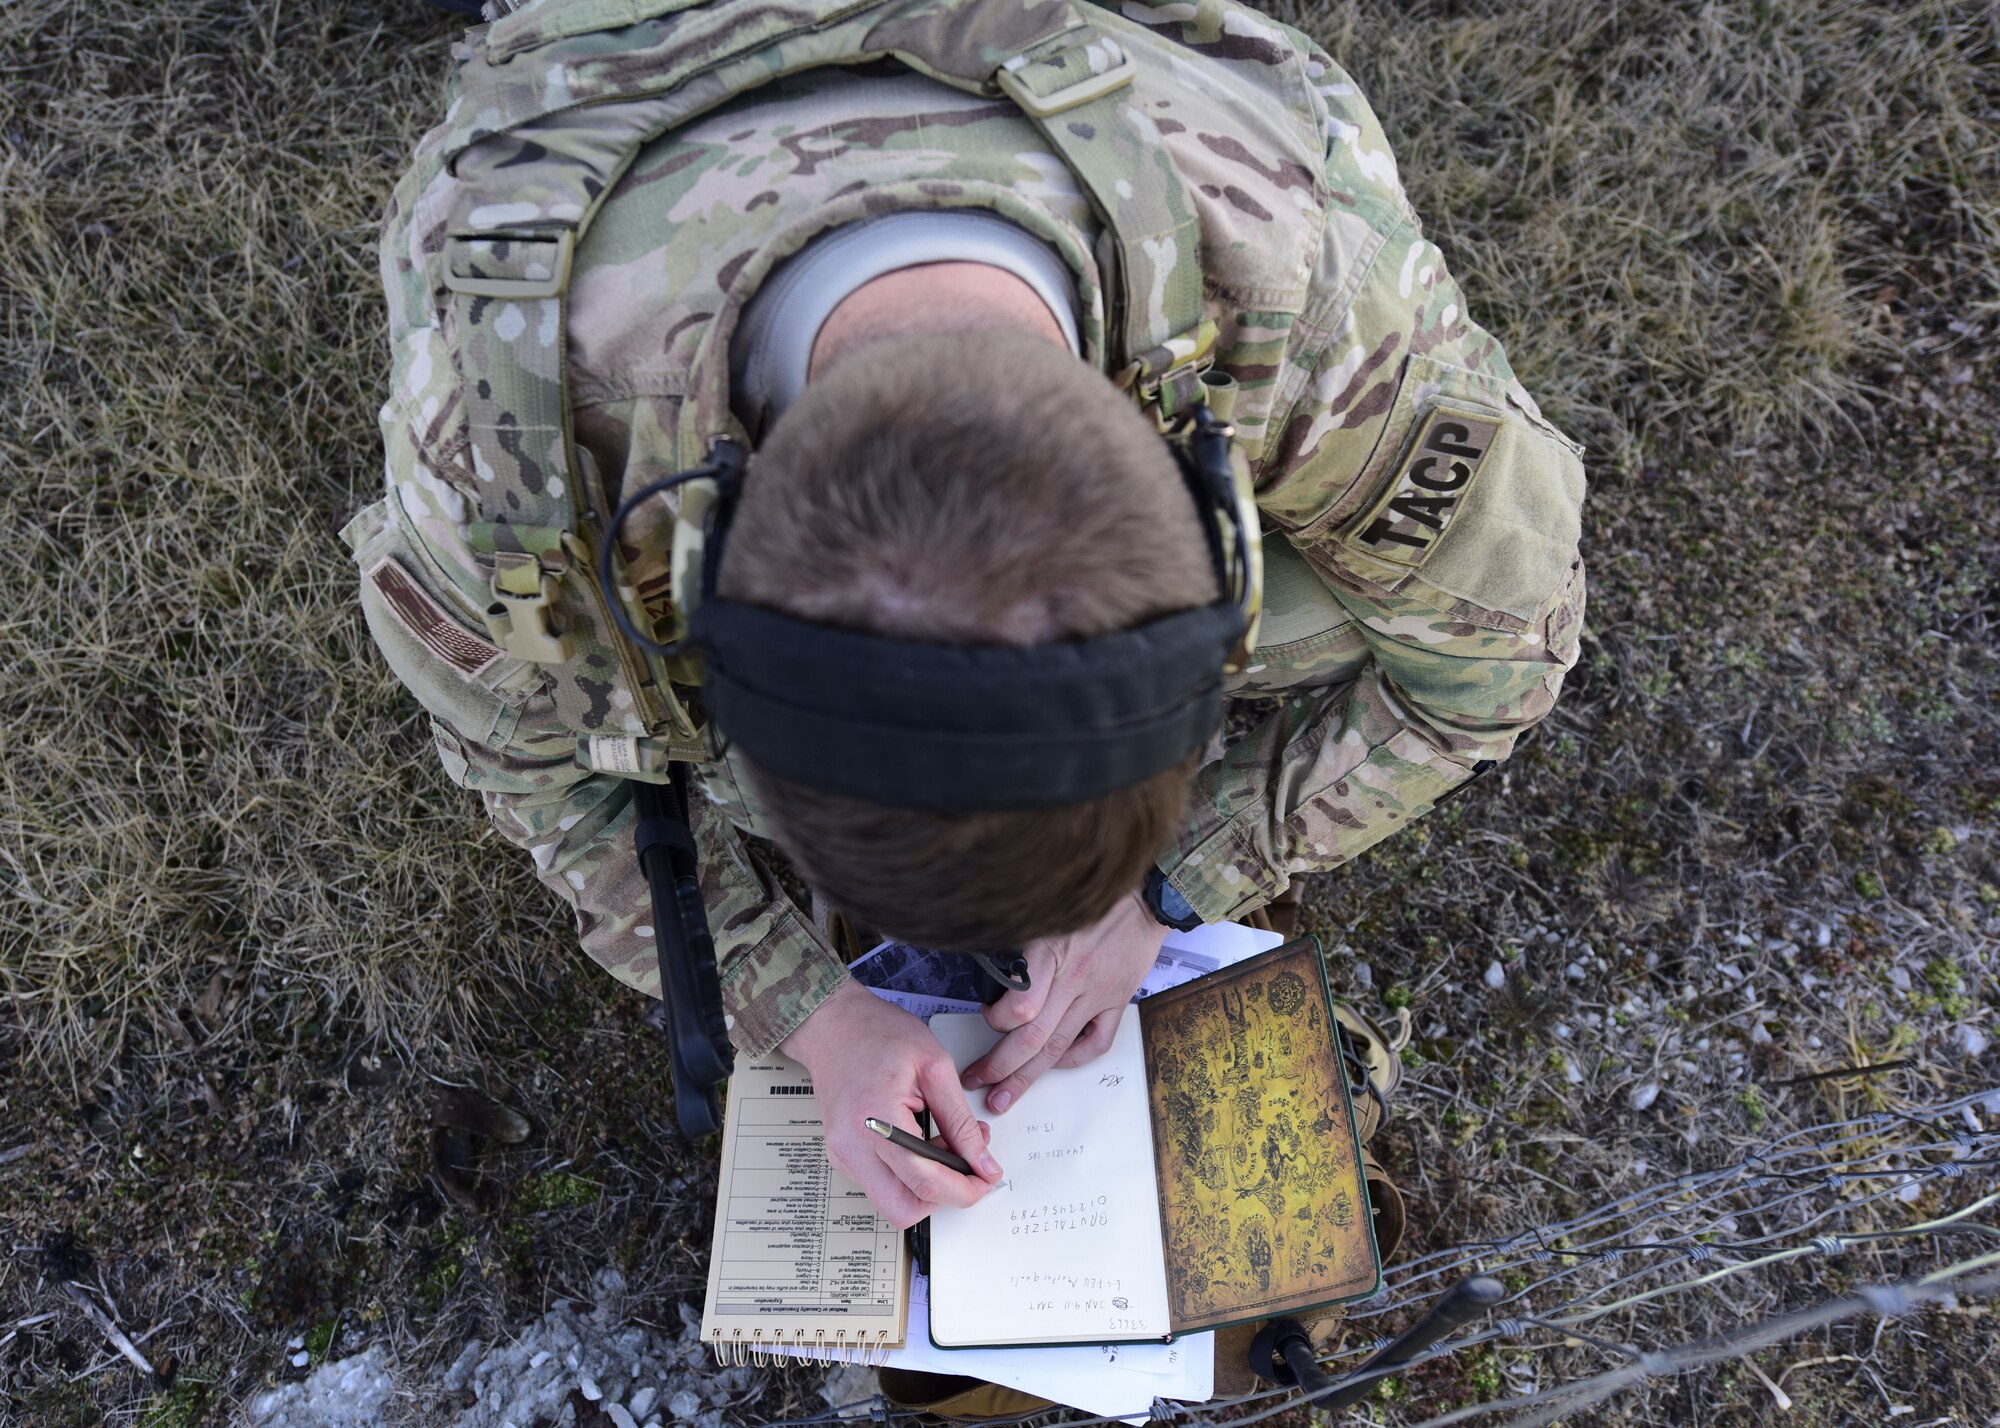 A Joint Terminal Attack Controller from the 7th Air Support Operations Squadron, located in Fort Bliss, Texas, writes down information during a joint training at Warshaw, Mo., Jan. 31, 2018. JTACs are personnel who are authorized to call airstrikes and help coordinate close-air-support missions. (U.S. Air Force by Staff Sgt. Danielle Quilla)